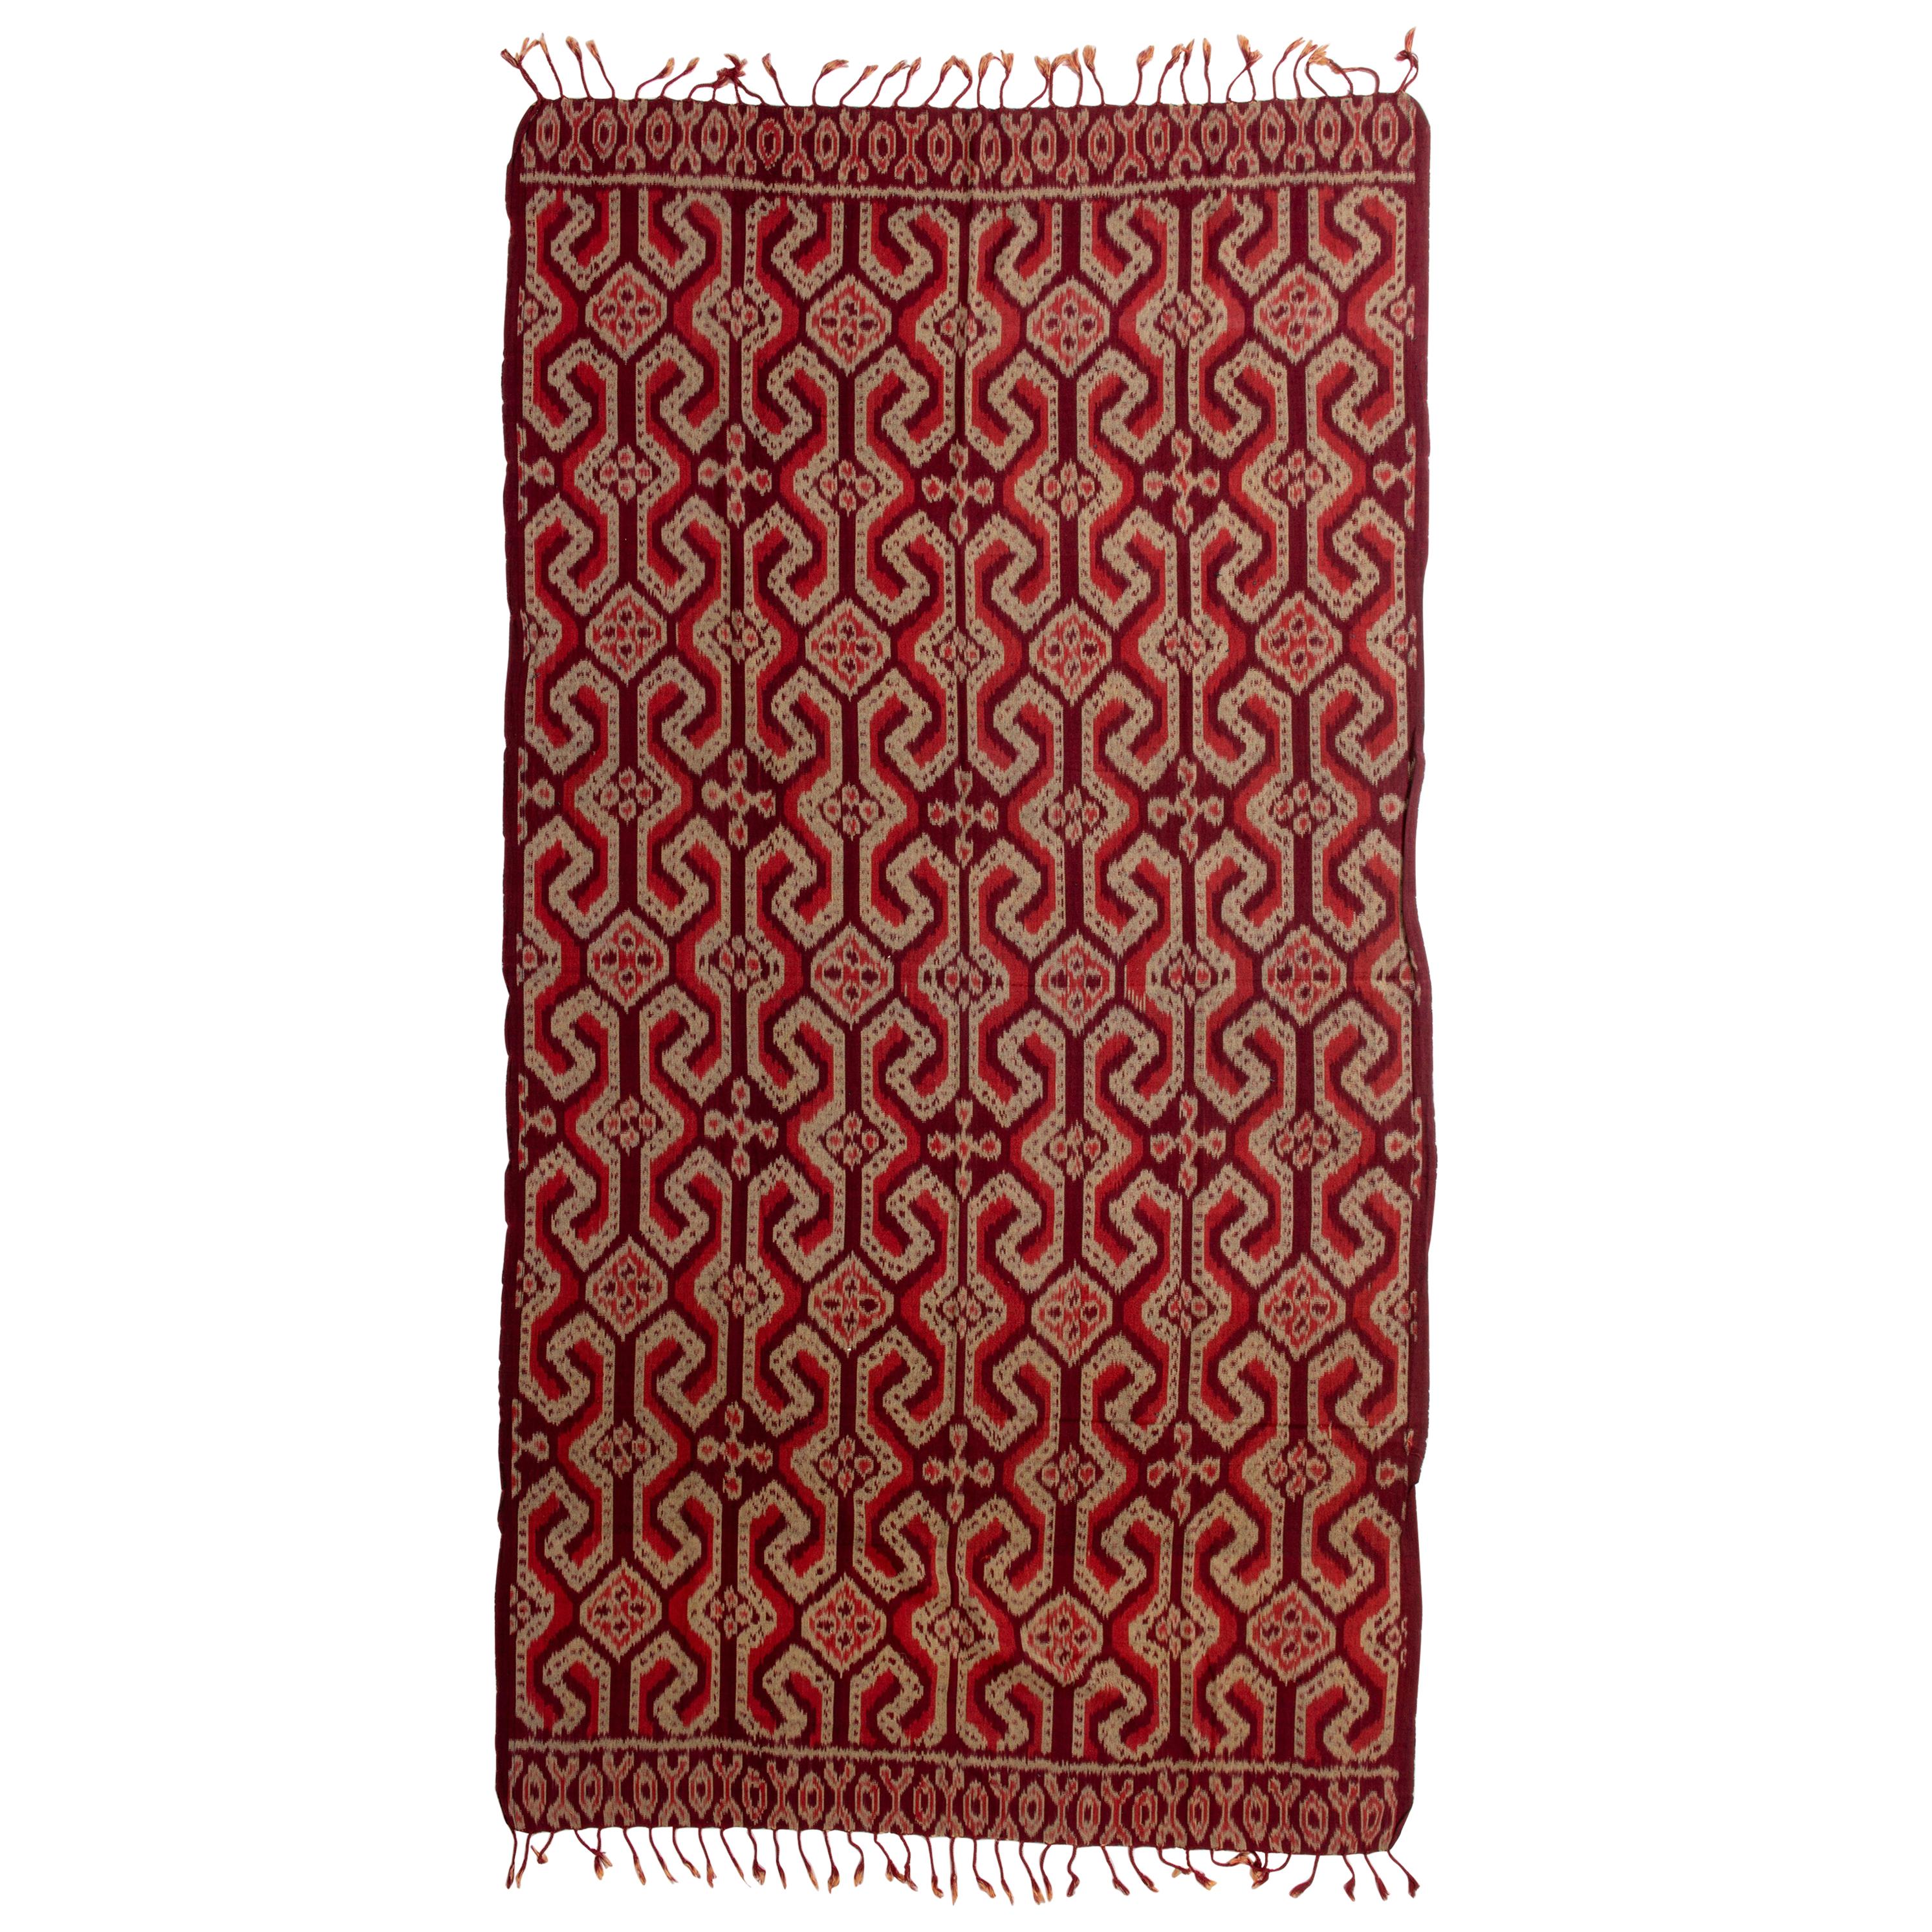 Old IKAT Tapestry